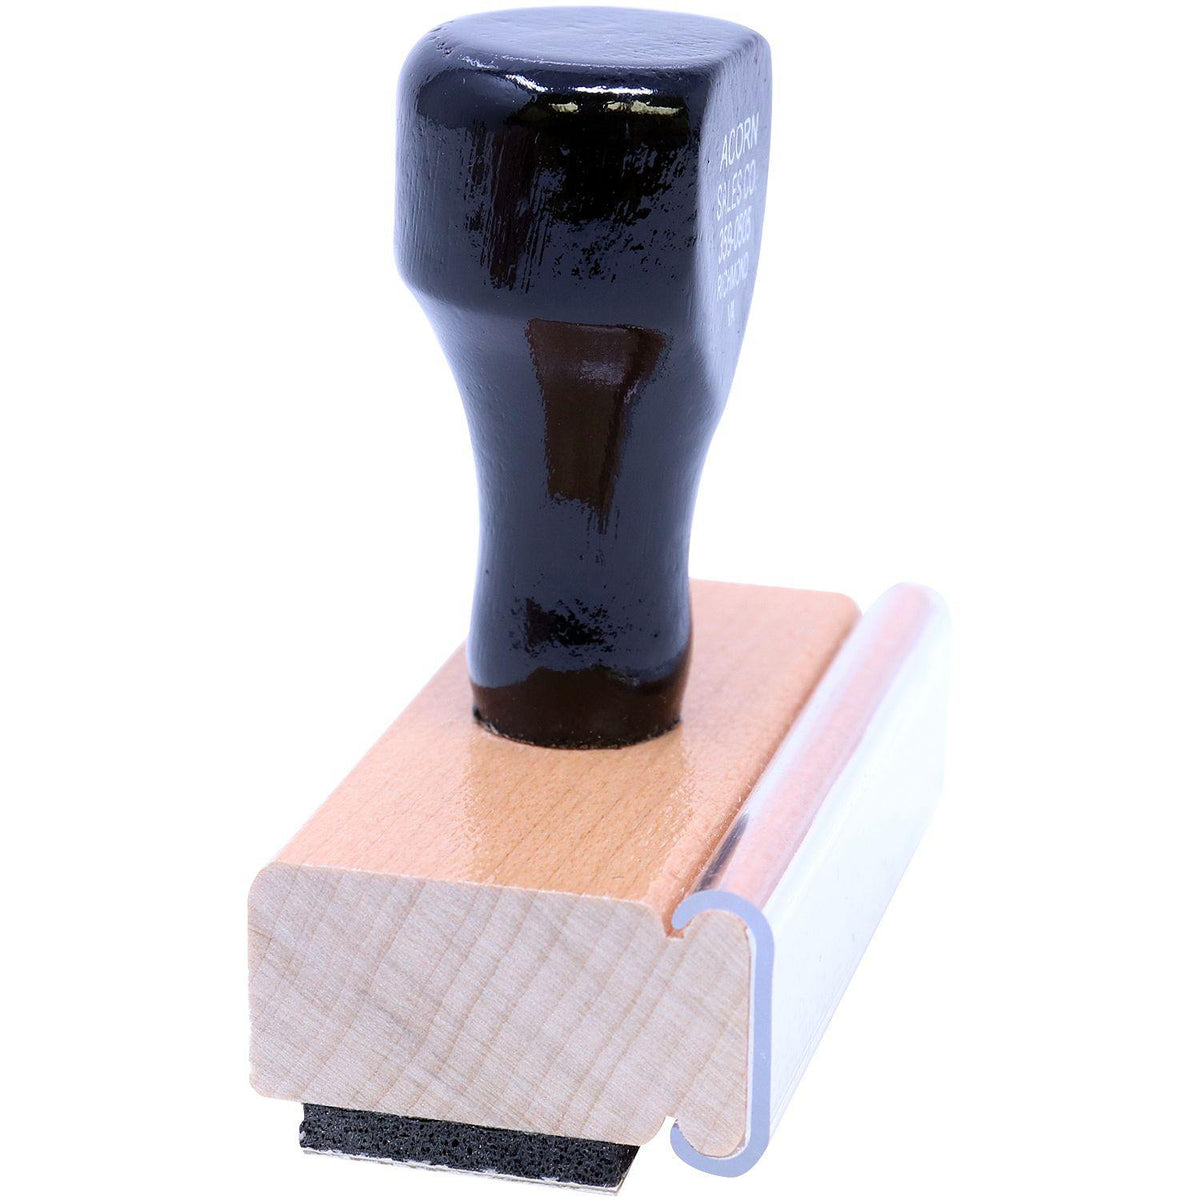 Side View of Large Admitted Rubber Stamp at an Angle